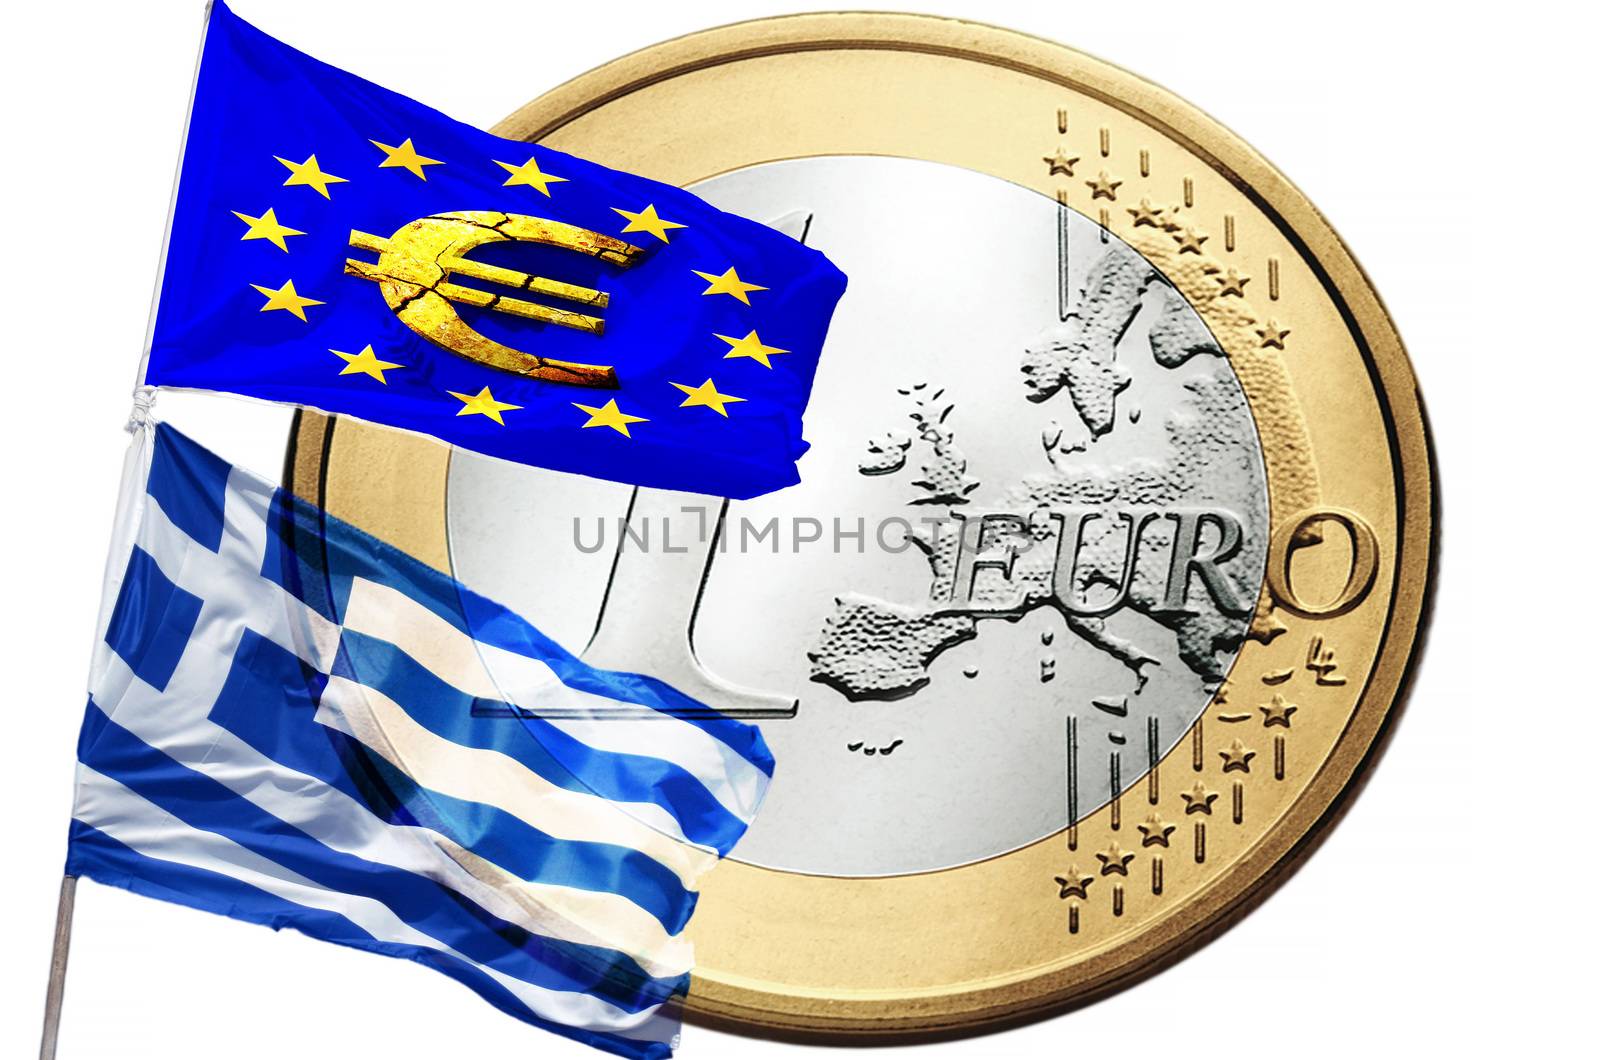 Greece and the European Union by JFsPic